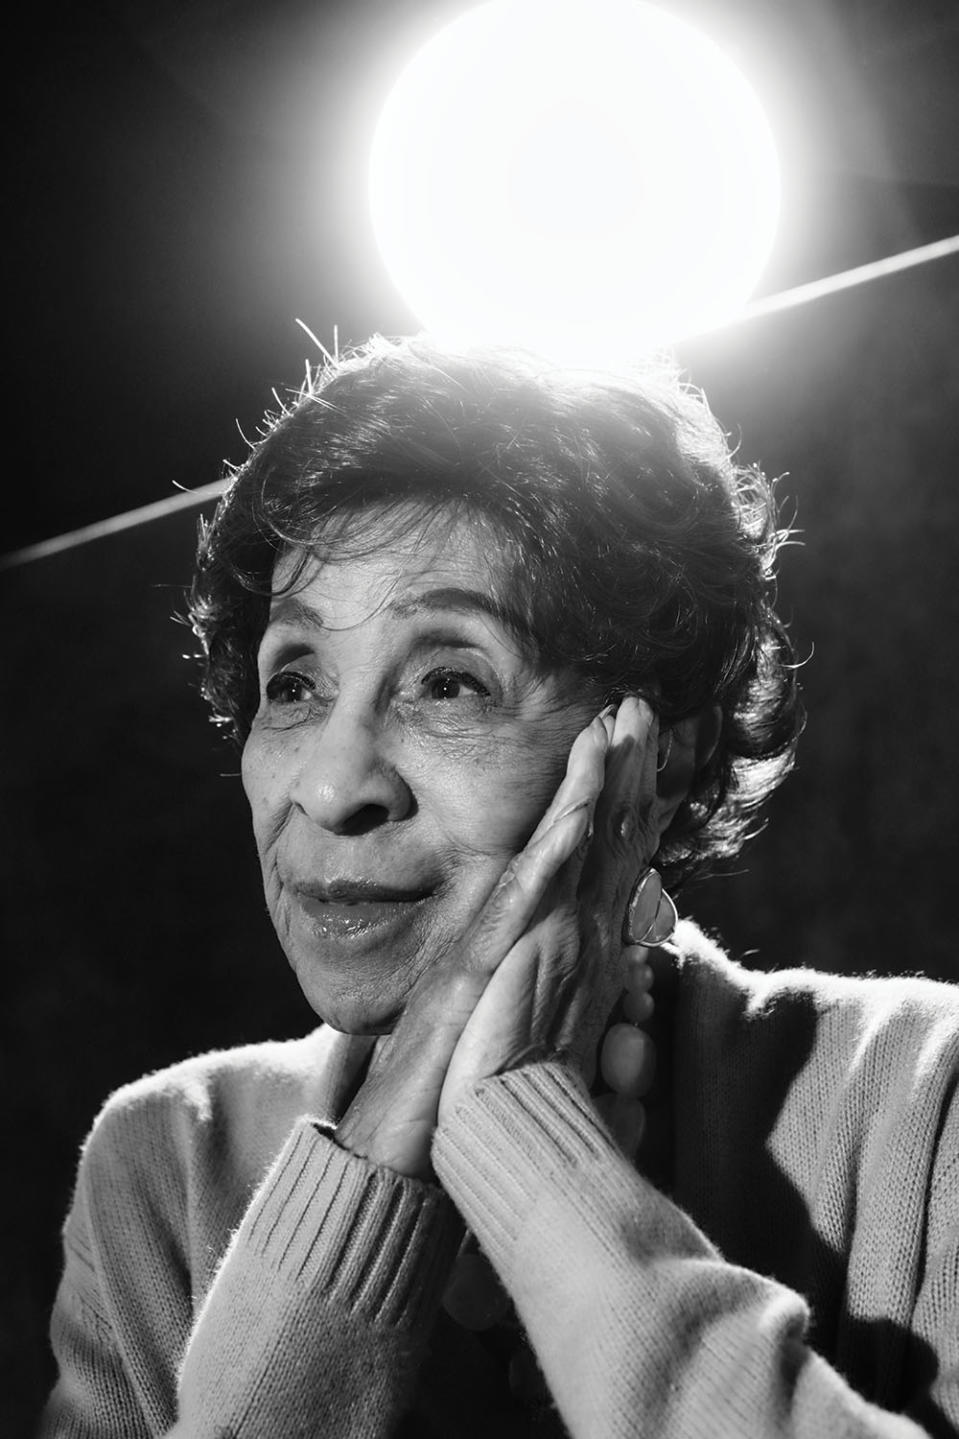 Actress Marla Gibbs poses for a portrait at PMC Studios on Feb. 1, 2022, in Los Angeles, California. - Credit: Photographed by Michael Buckner